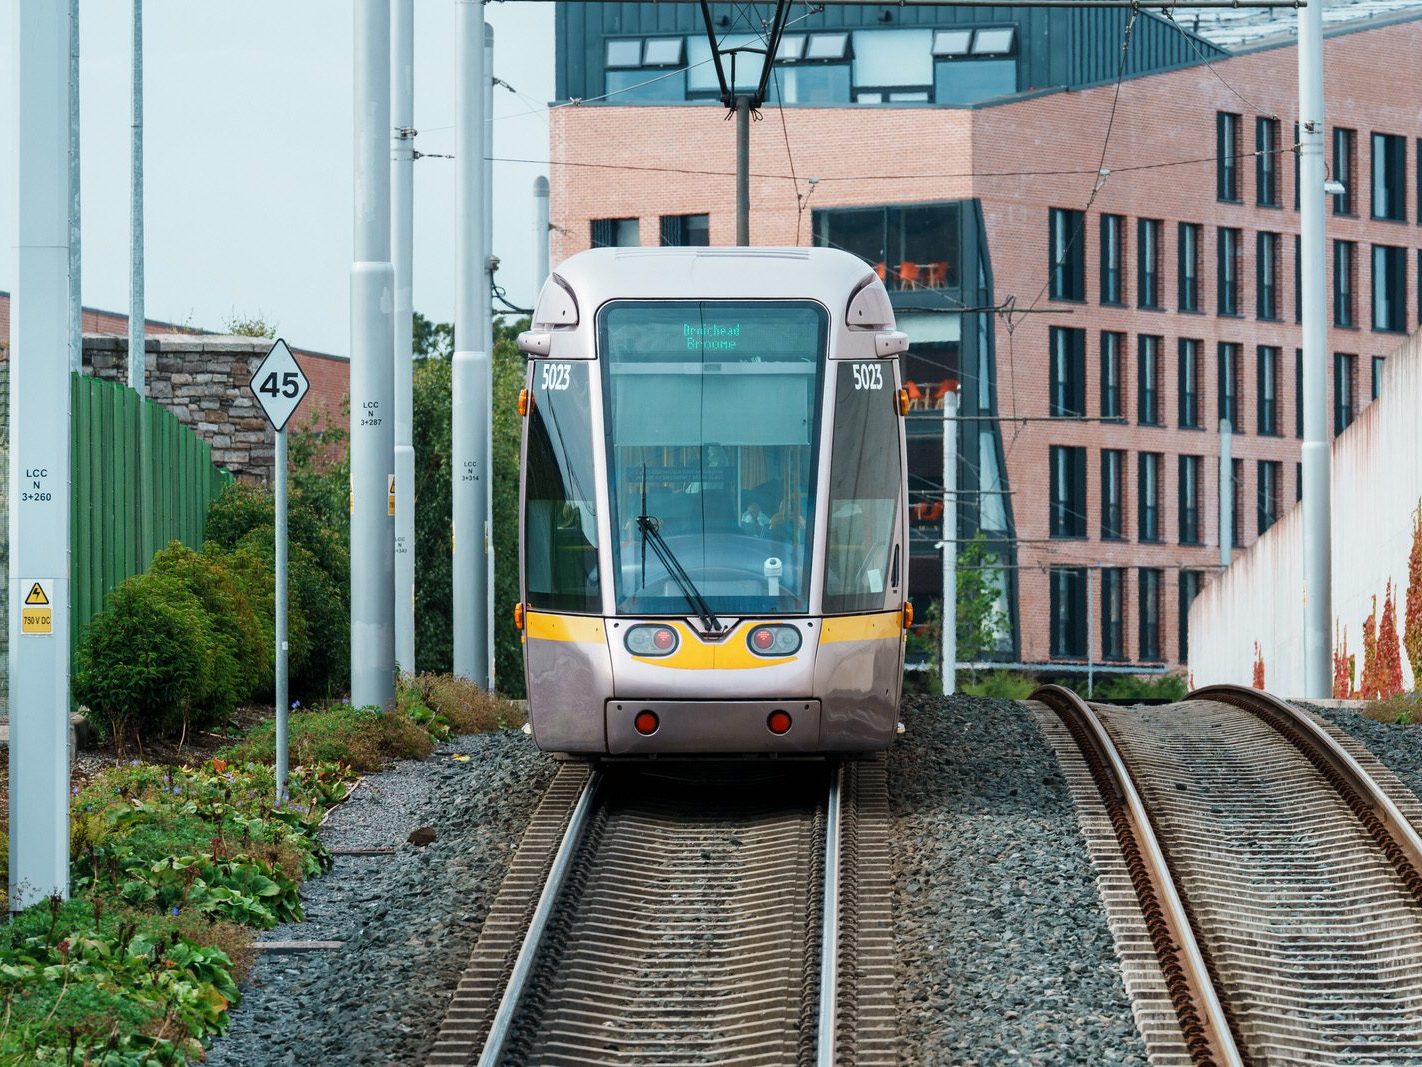 PUBLIC TRANSPORT AT BROADSTONE [RANDOM IMAGES OF LUAS TRAMS ARRIVING AND LEAVING] 005